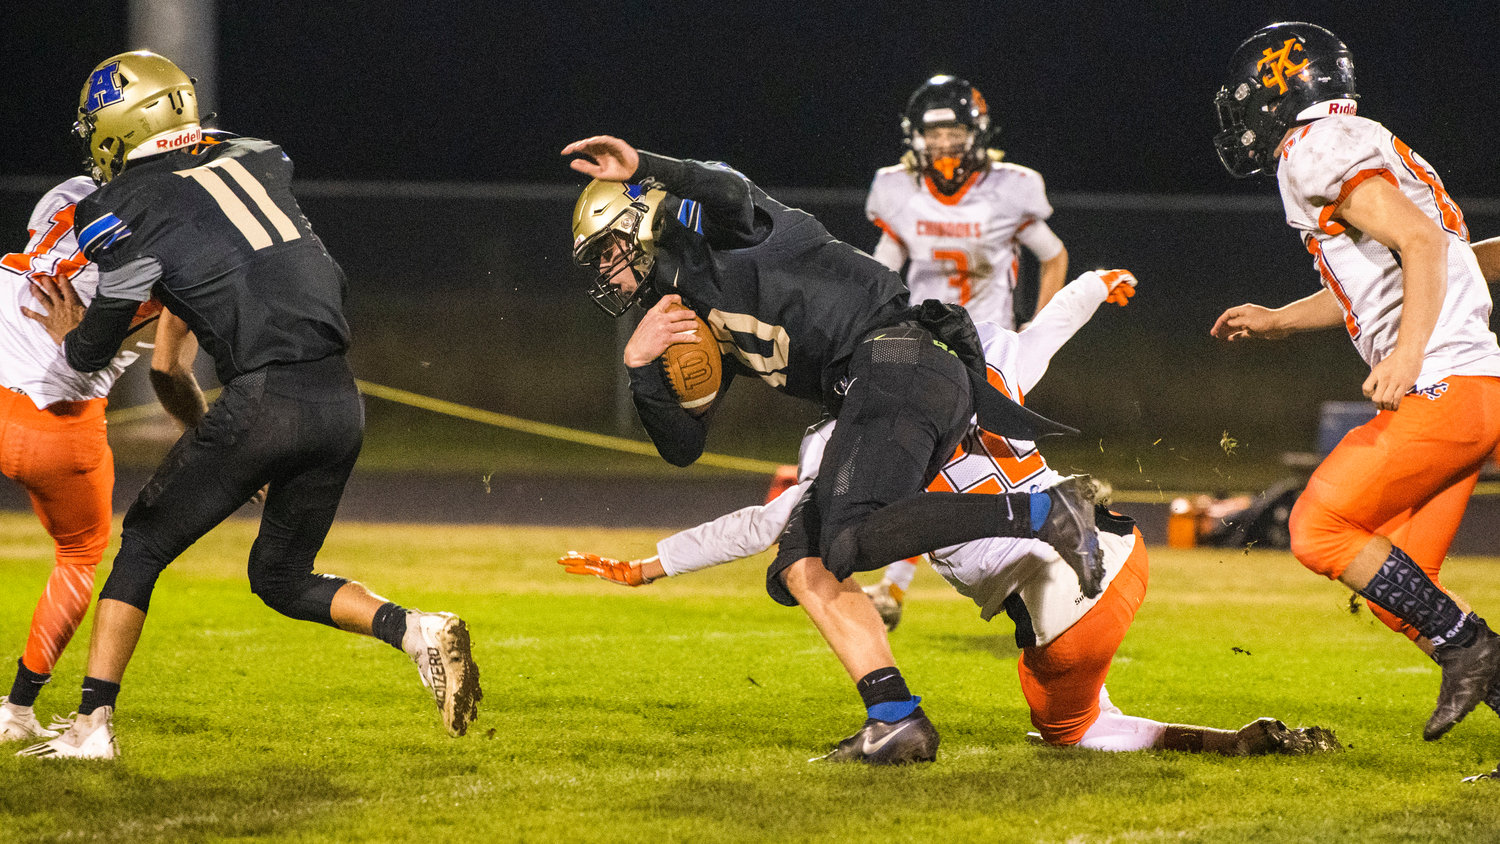 Adna quarterback Lane Johnson (10) lcrashes through Kalama defenders while running with the football during a Thursday night game at Pirate Stadium.